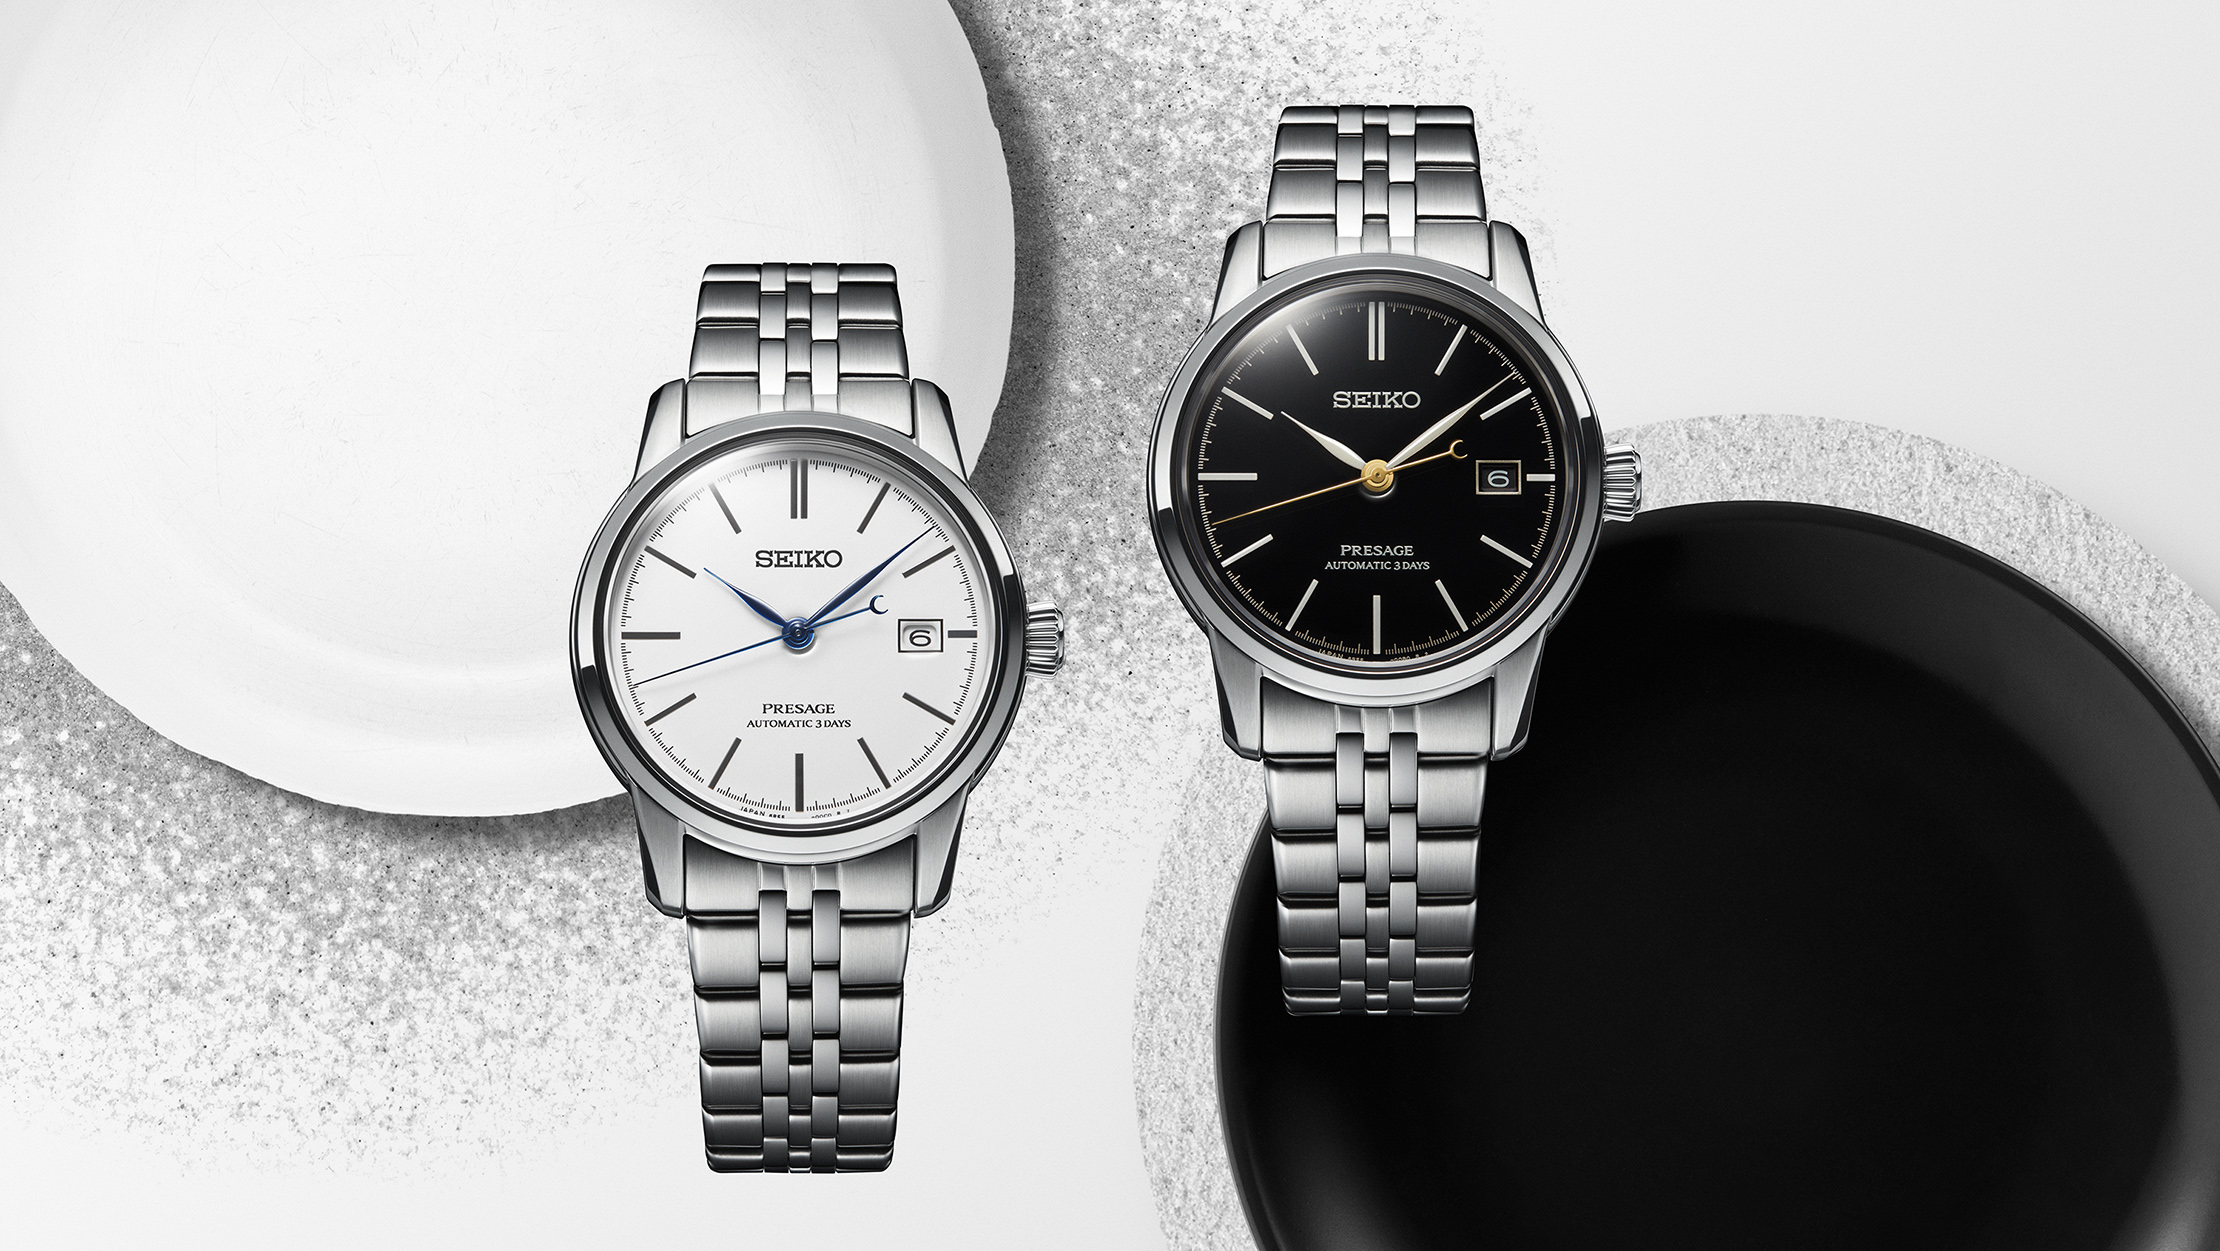 A new dial design puts artistry front and center in the latest 